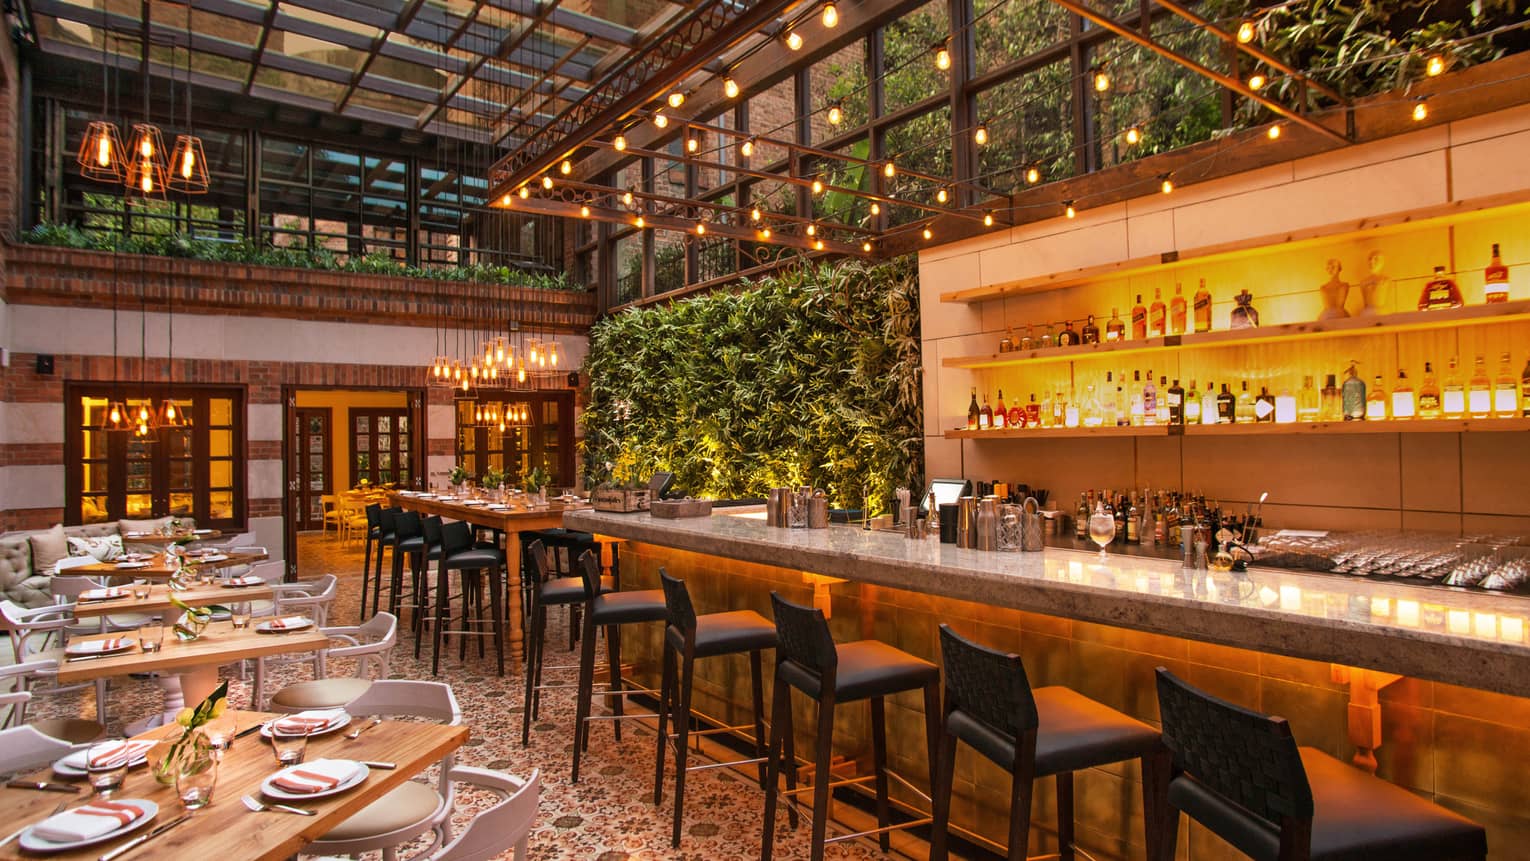 Castanyoles dining room and bar with high ceilings, Spanish-style decor, living walls with lush green plants, patio lights